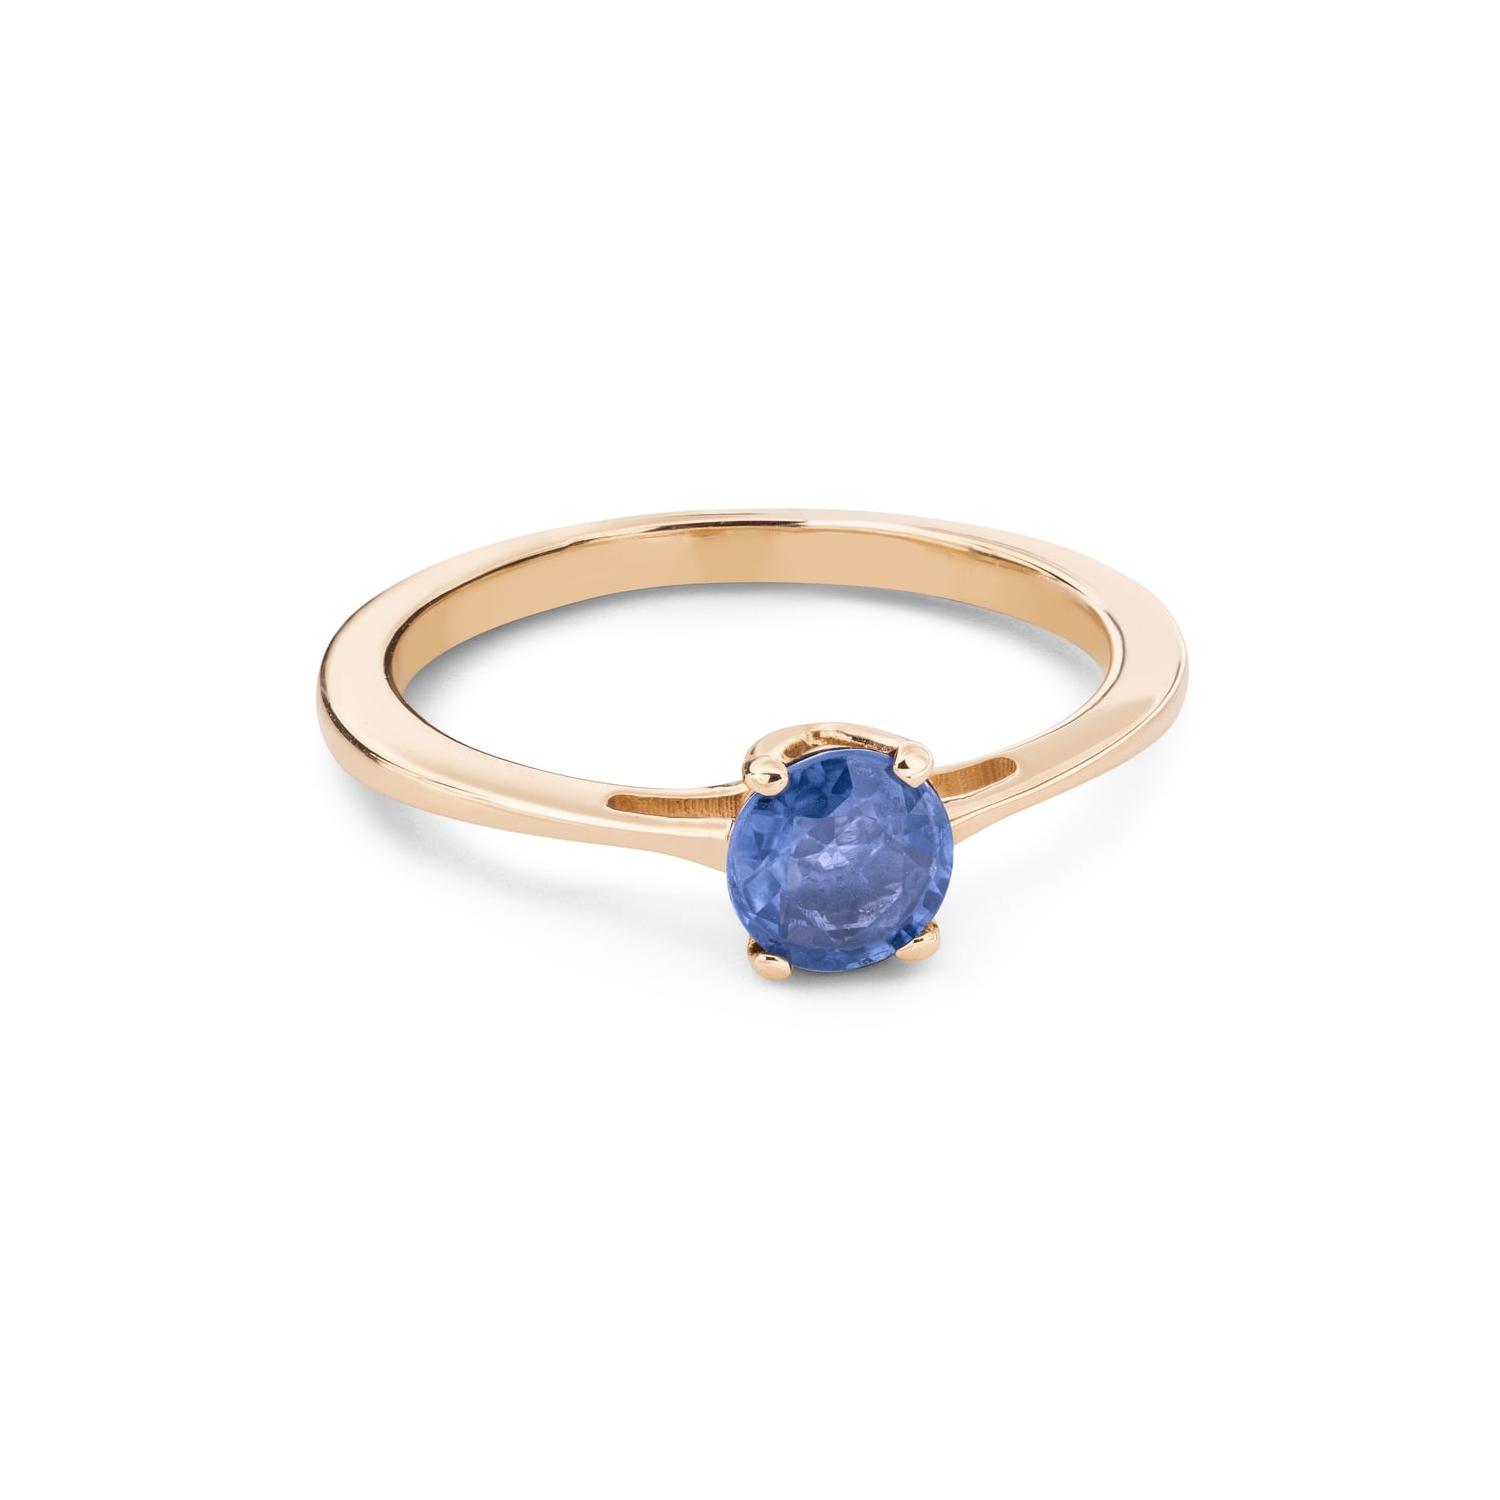 Engagement ring with gemstones "Sapphire 63"